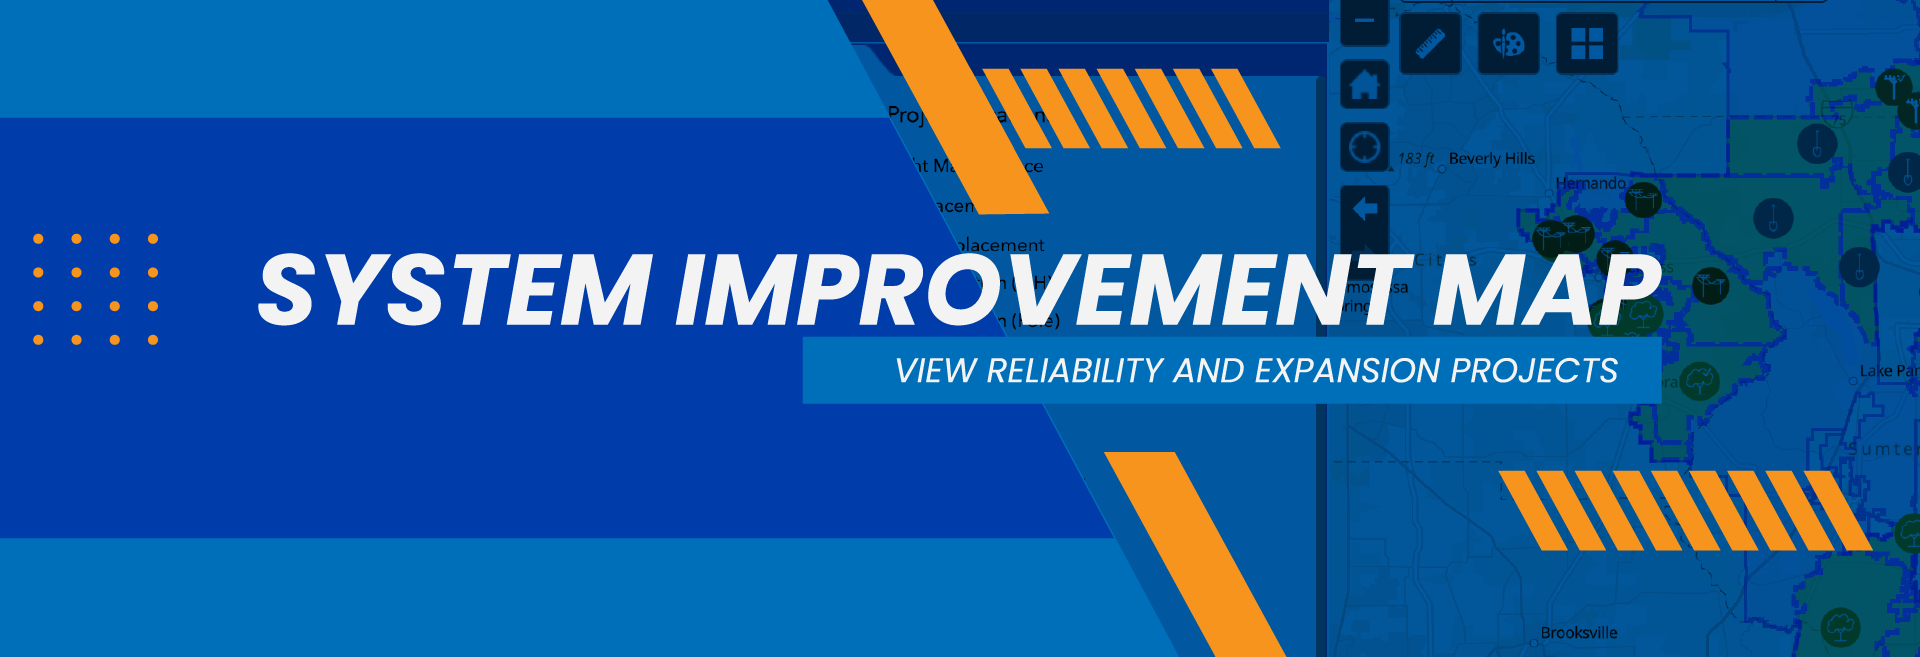 System Improvement Map - View Reliability And Expansion Projects